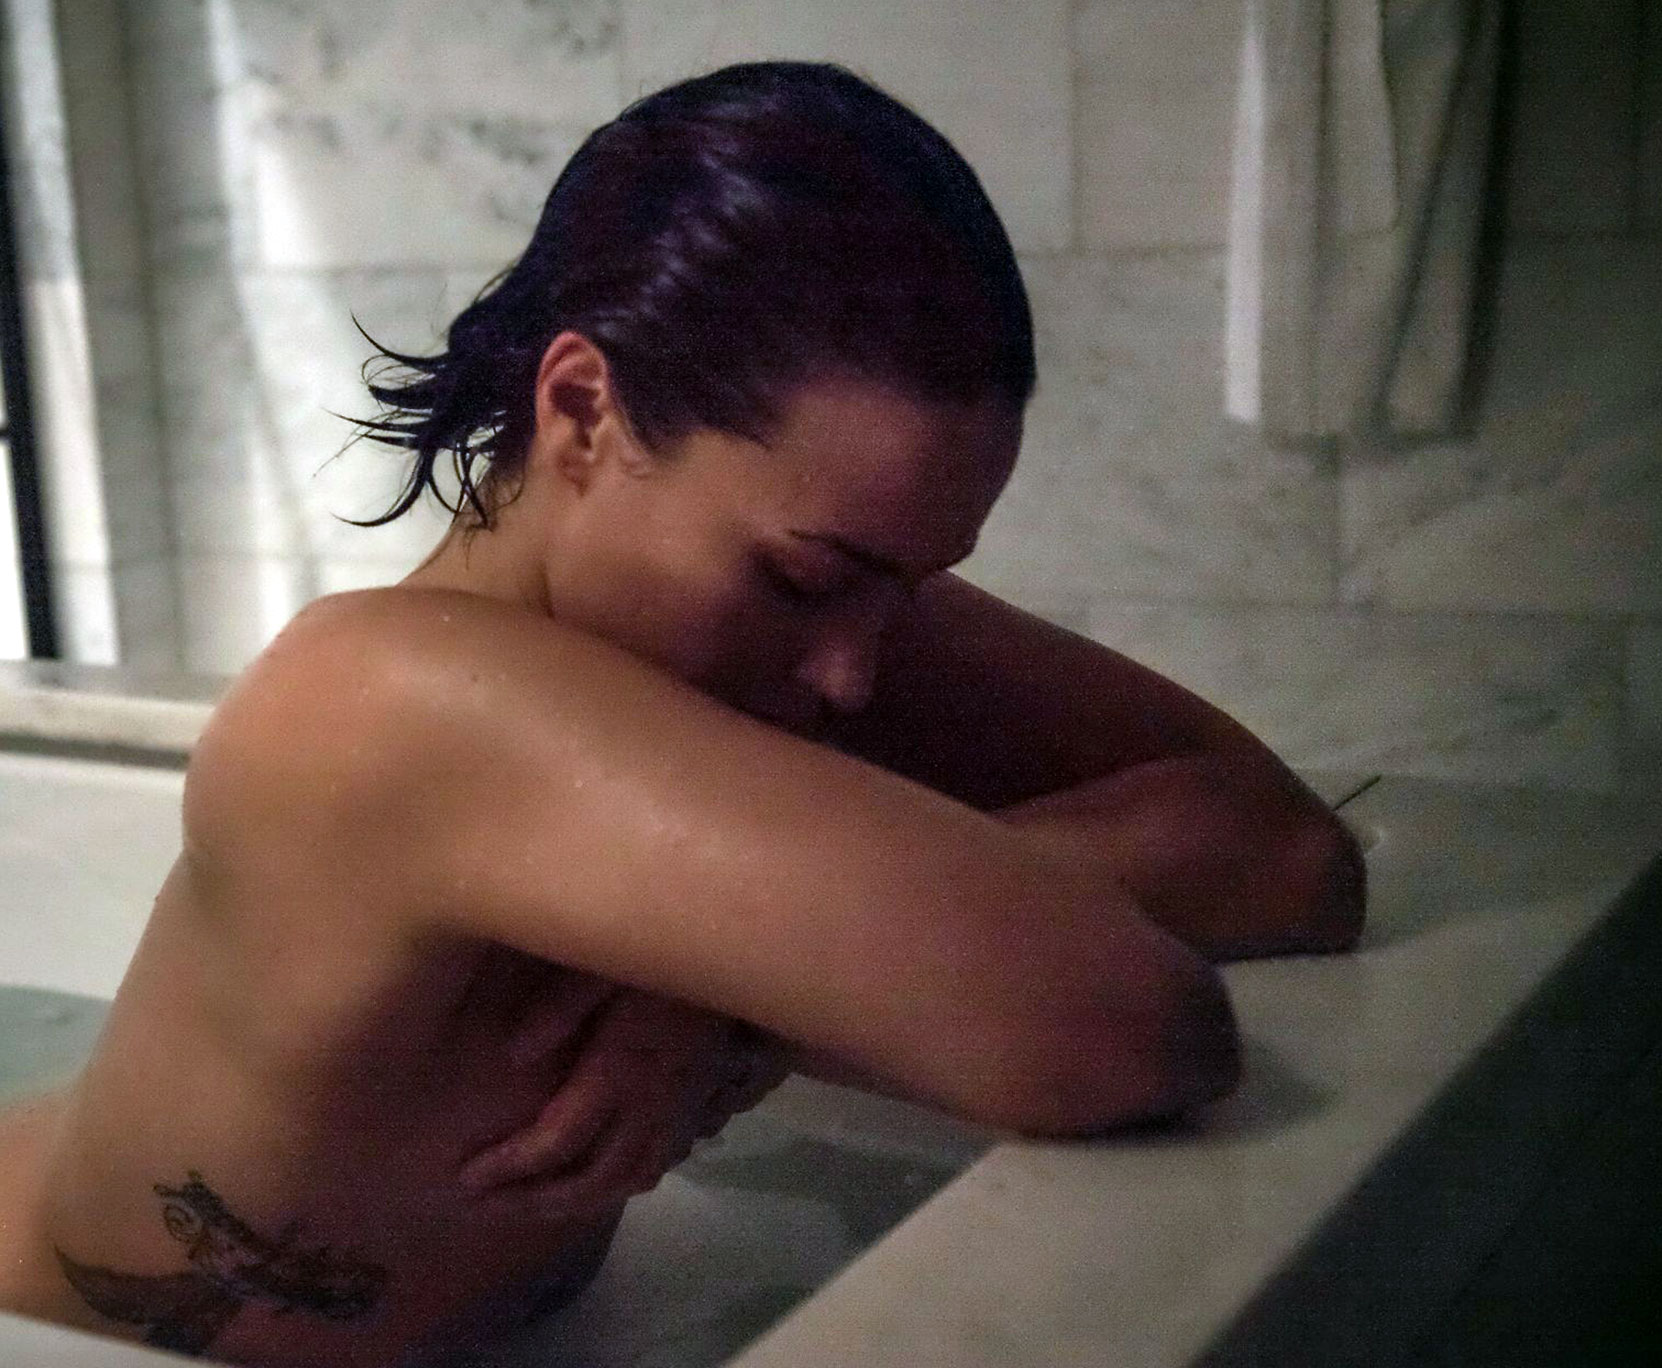 Take a look at some photos of Demi Lovato naked that she’s done for the W M...